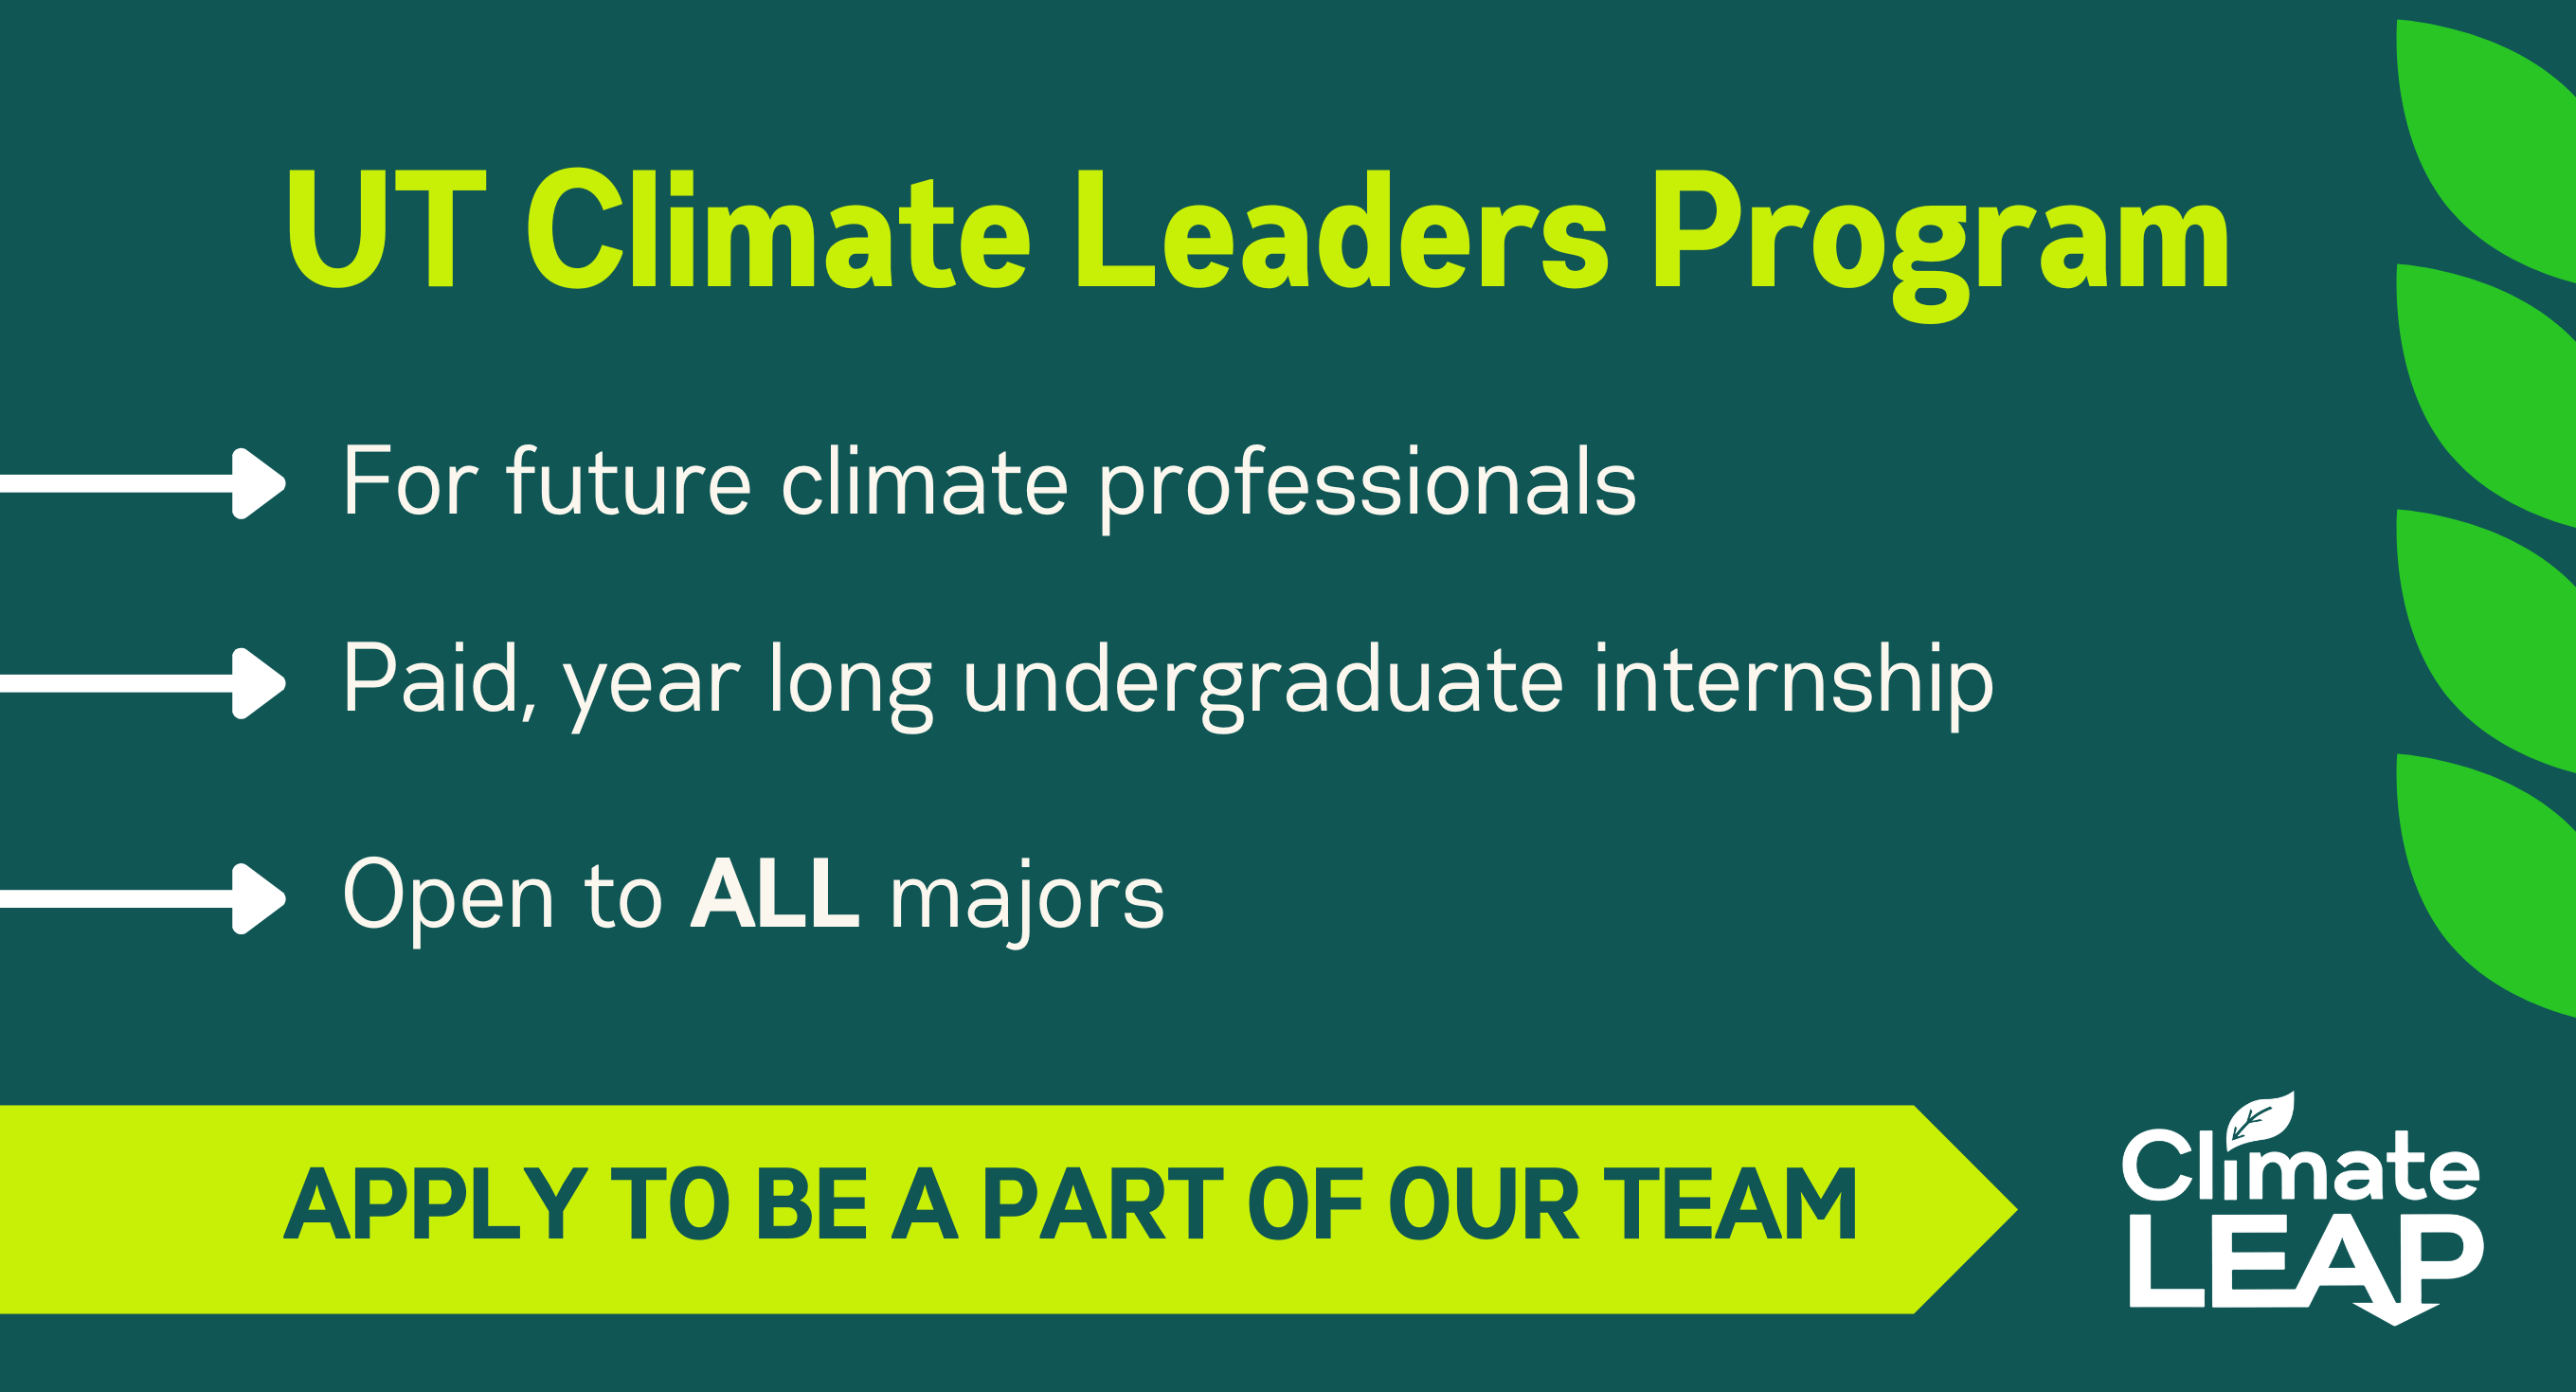 The UT Climate Leaders Program is for future climate professions, a paid, yearlong internship, and open to ALL majors. Apply to be a part of our team!